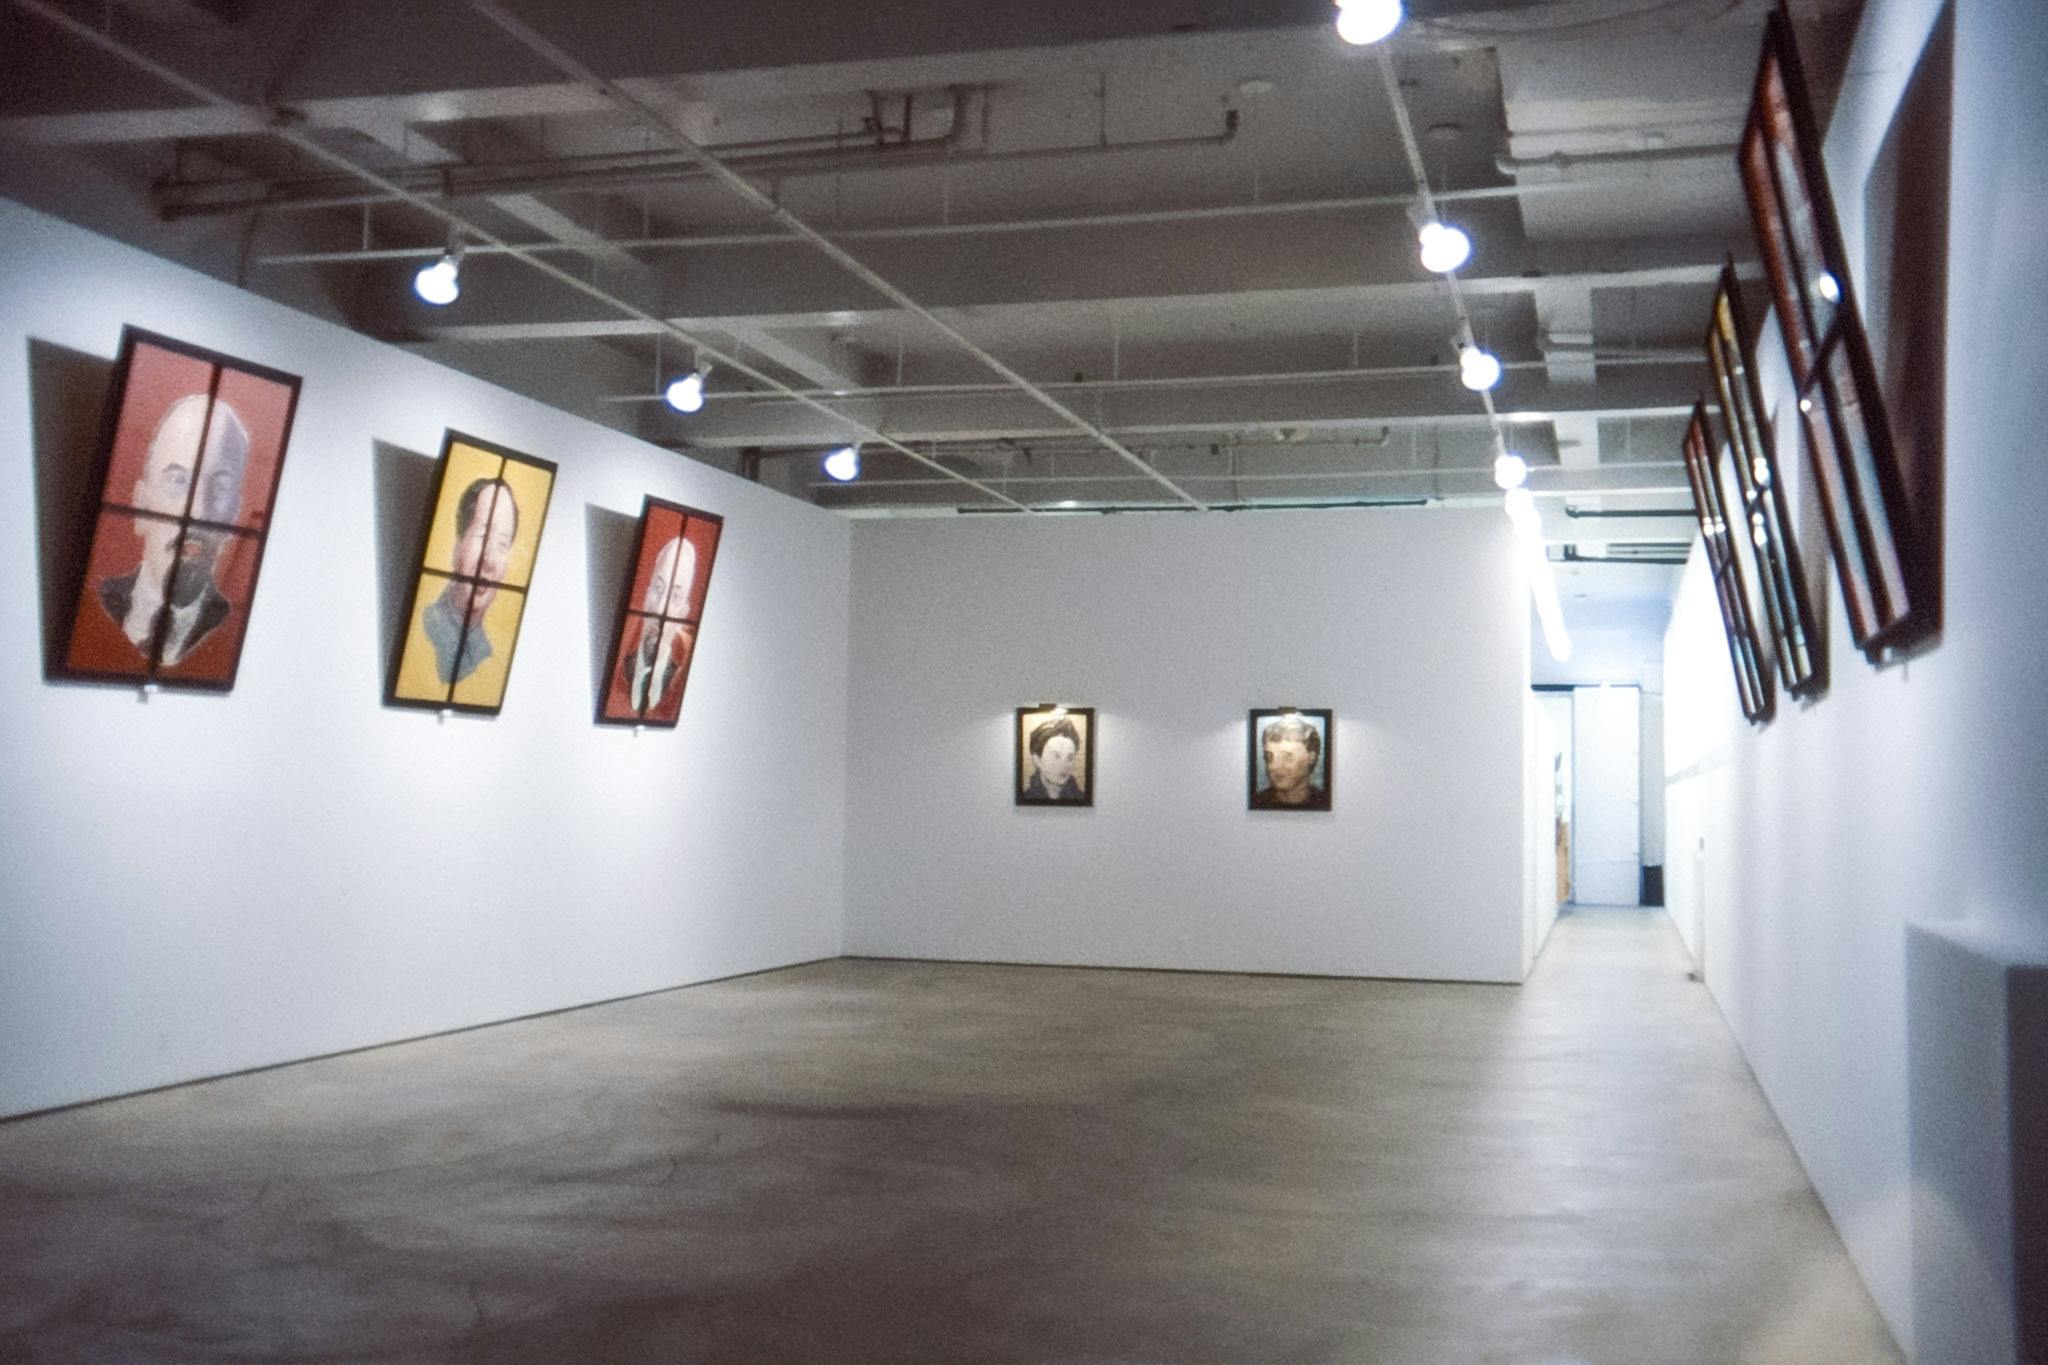 A photo of an installation view in the gallery.  Eight paintings mounted on three walls show the heads of famous historical figures including Mao Zedong and Vladimir Lenin.